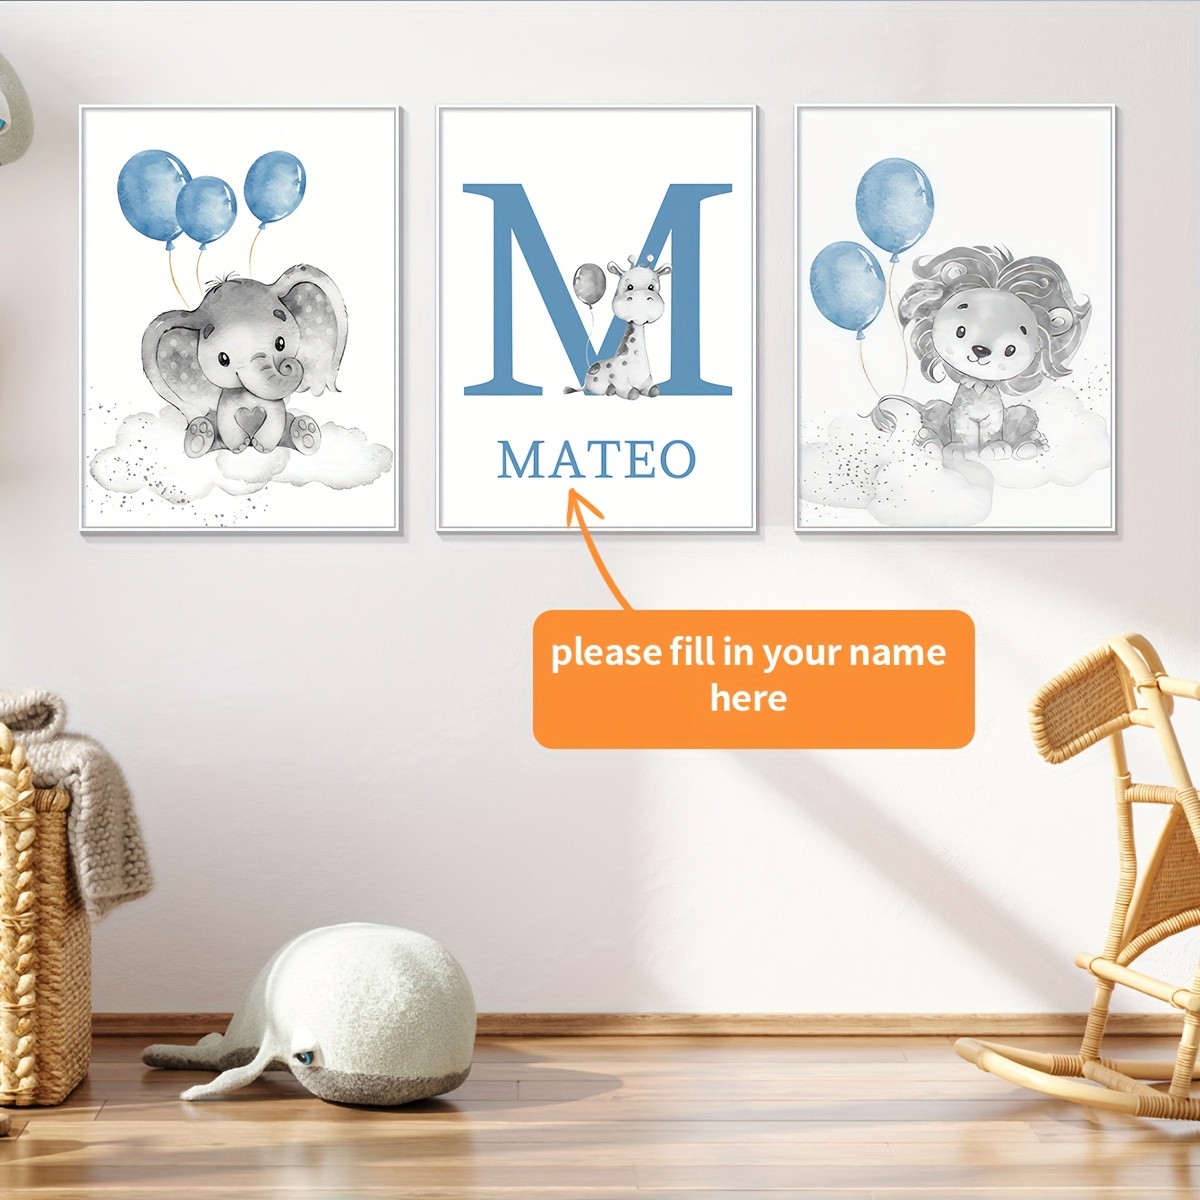 

3pcs/set Unframed Personalized Name Canvas Poster Wall Art, Customized Name Poster Home Decoration, Cartoon Elephant, Lion, And Deer Canvas Printed Bedroom Decoration, Perfect Gift And Decoration